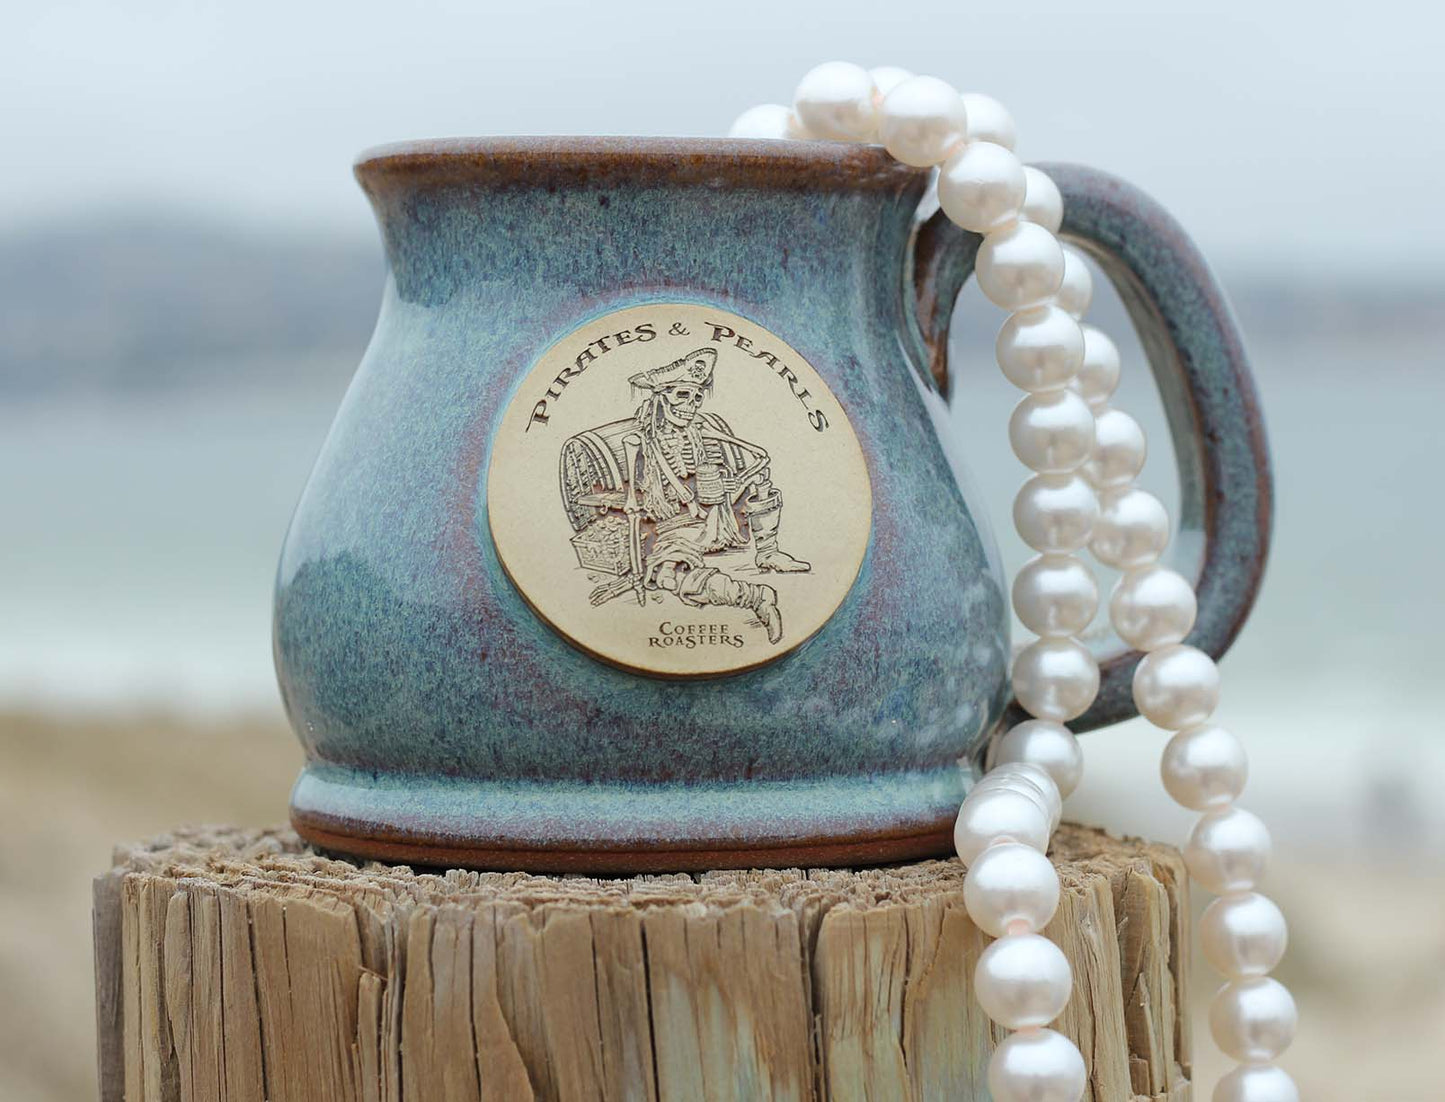 Pirates and Pearls Weather the Storm Potbelly Mug Sunset Hill Stoneware